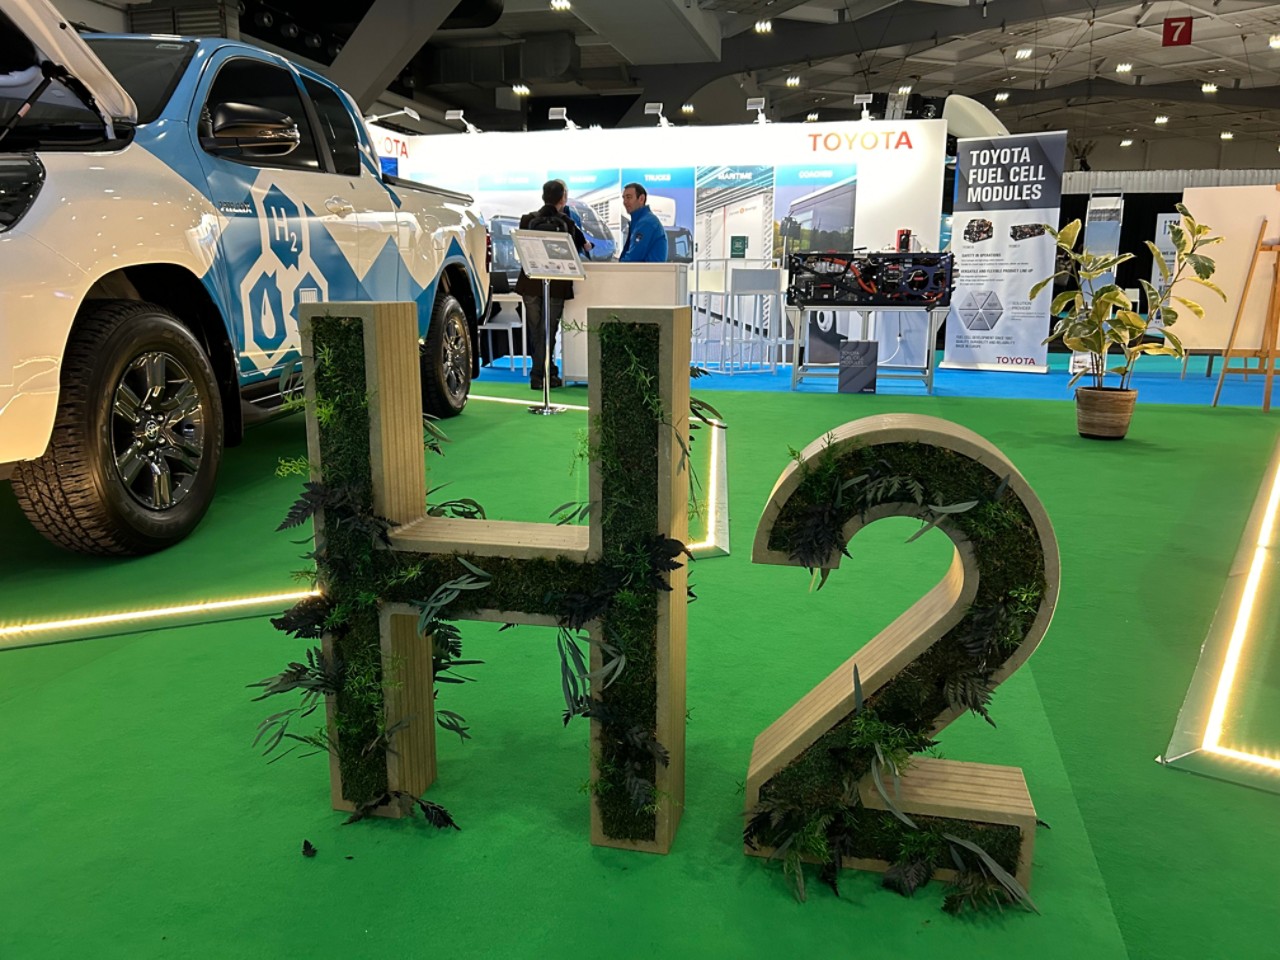 H2 sign in Toyota stand